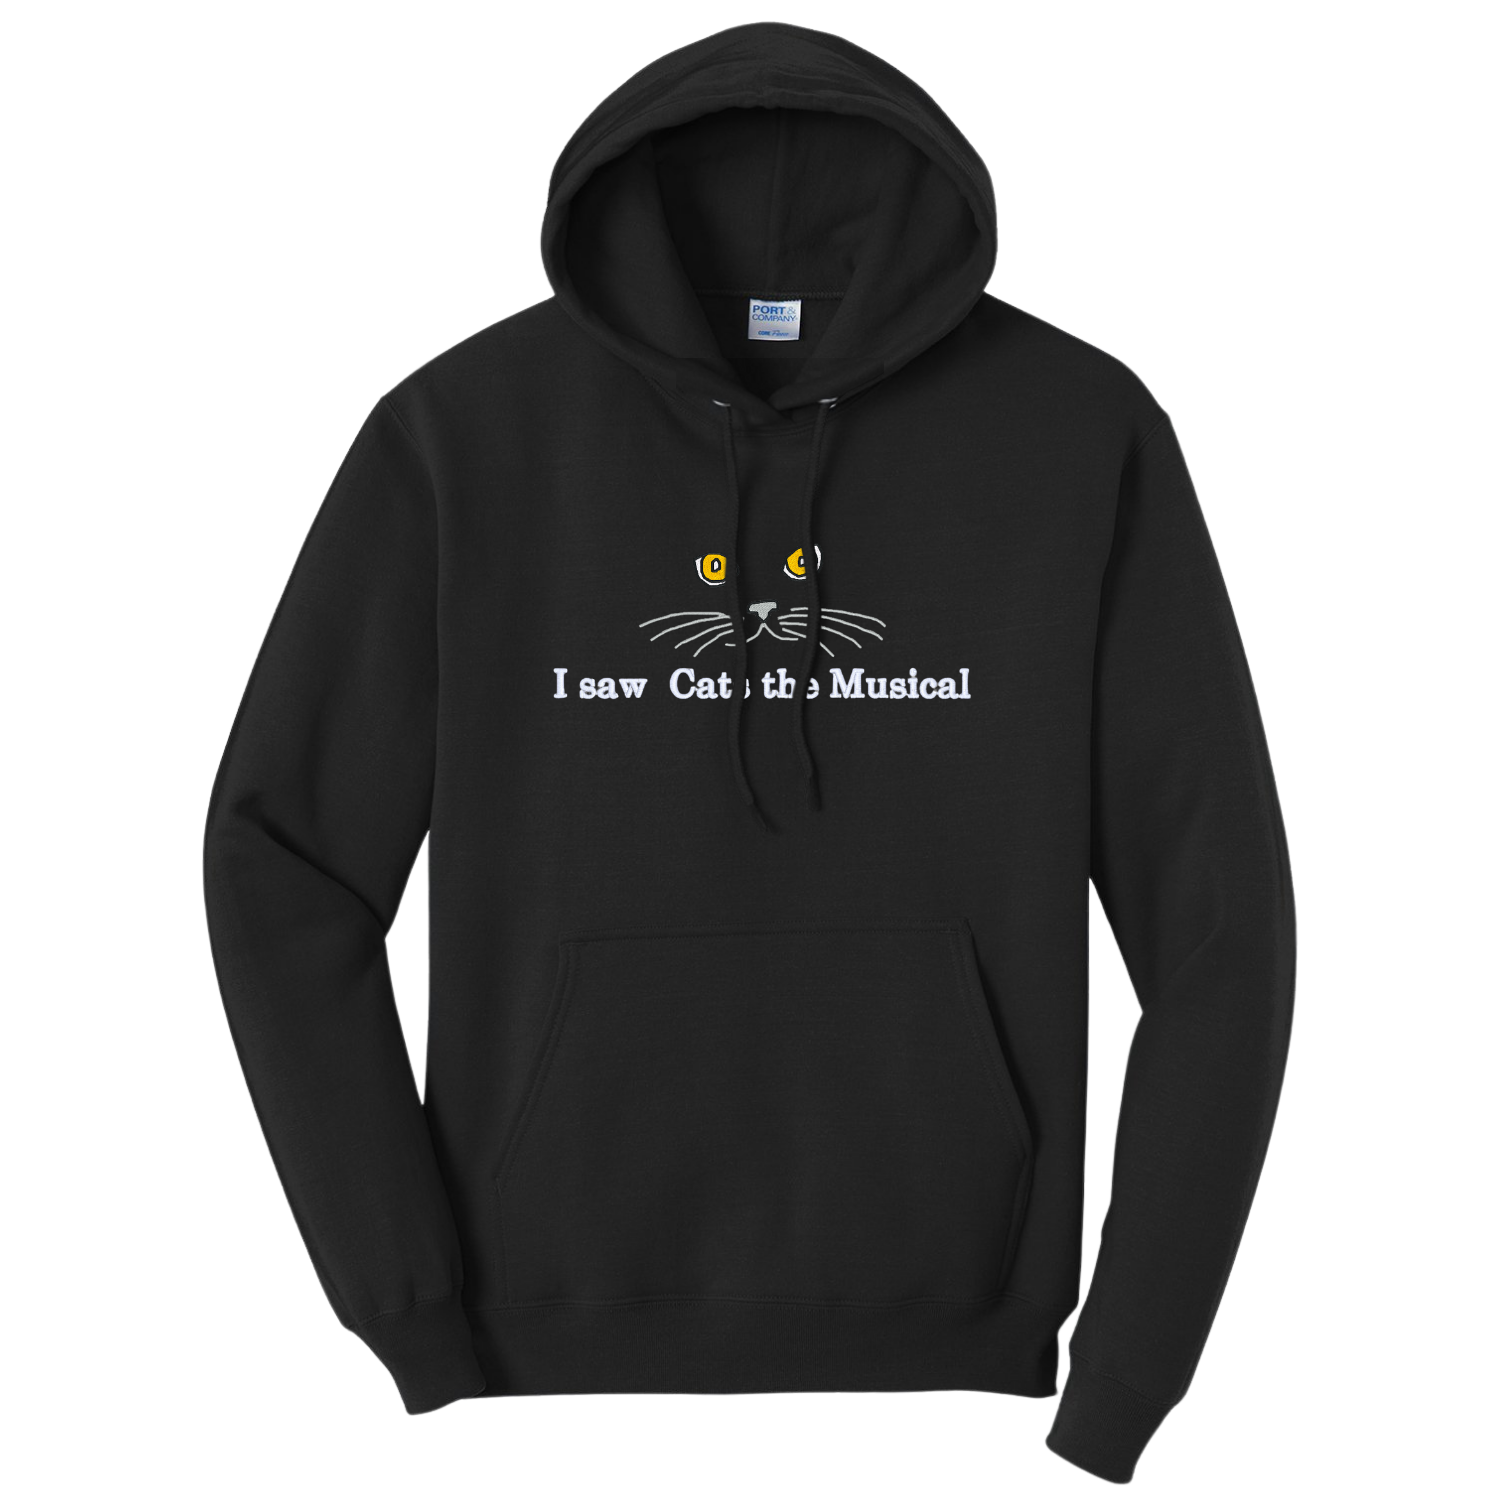 I Saw Cats the Musical Black Hoodie, Unisex